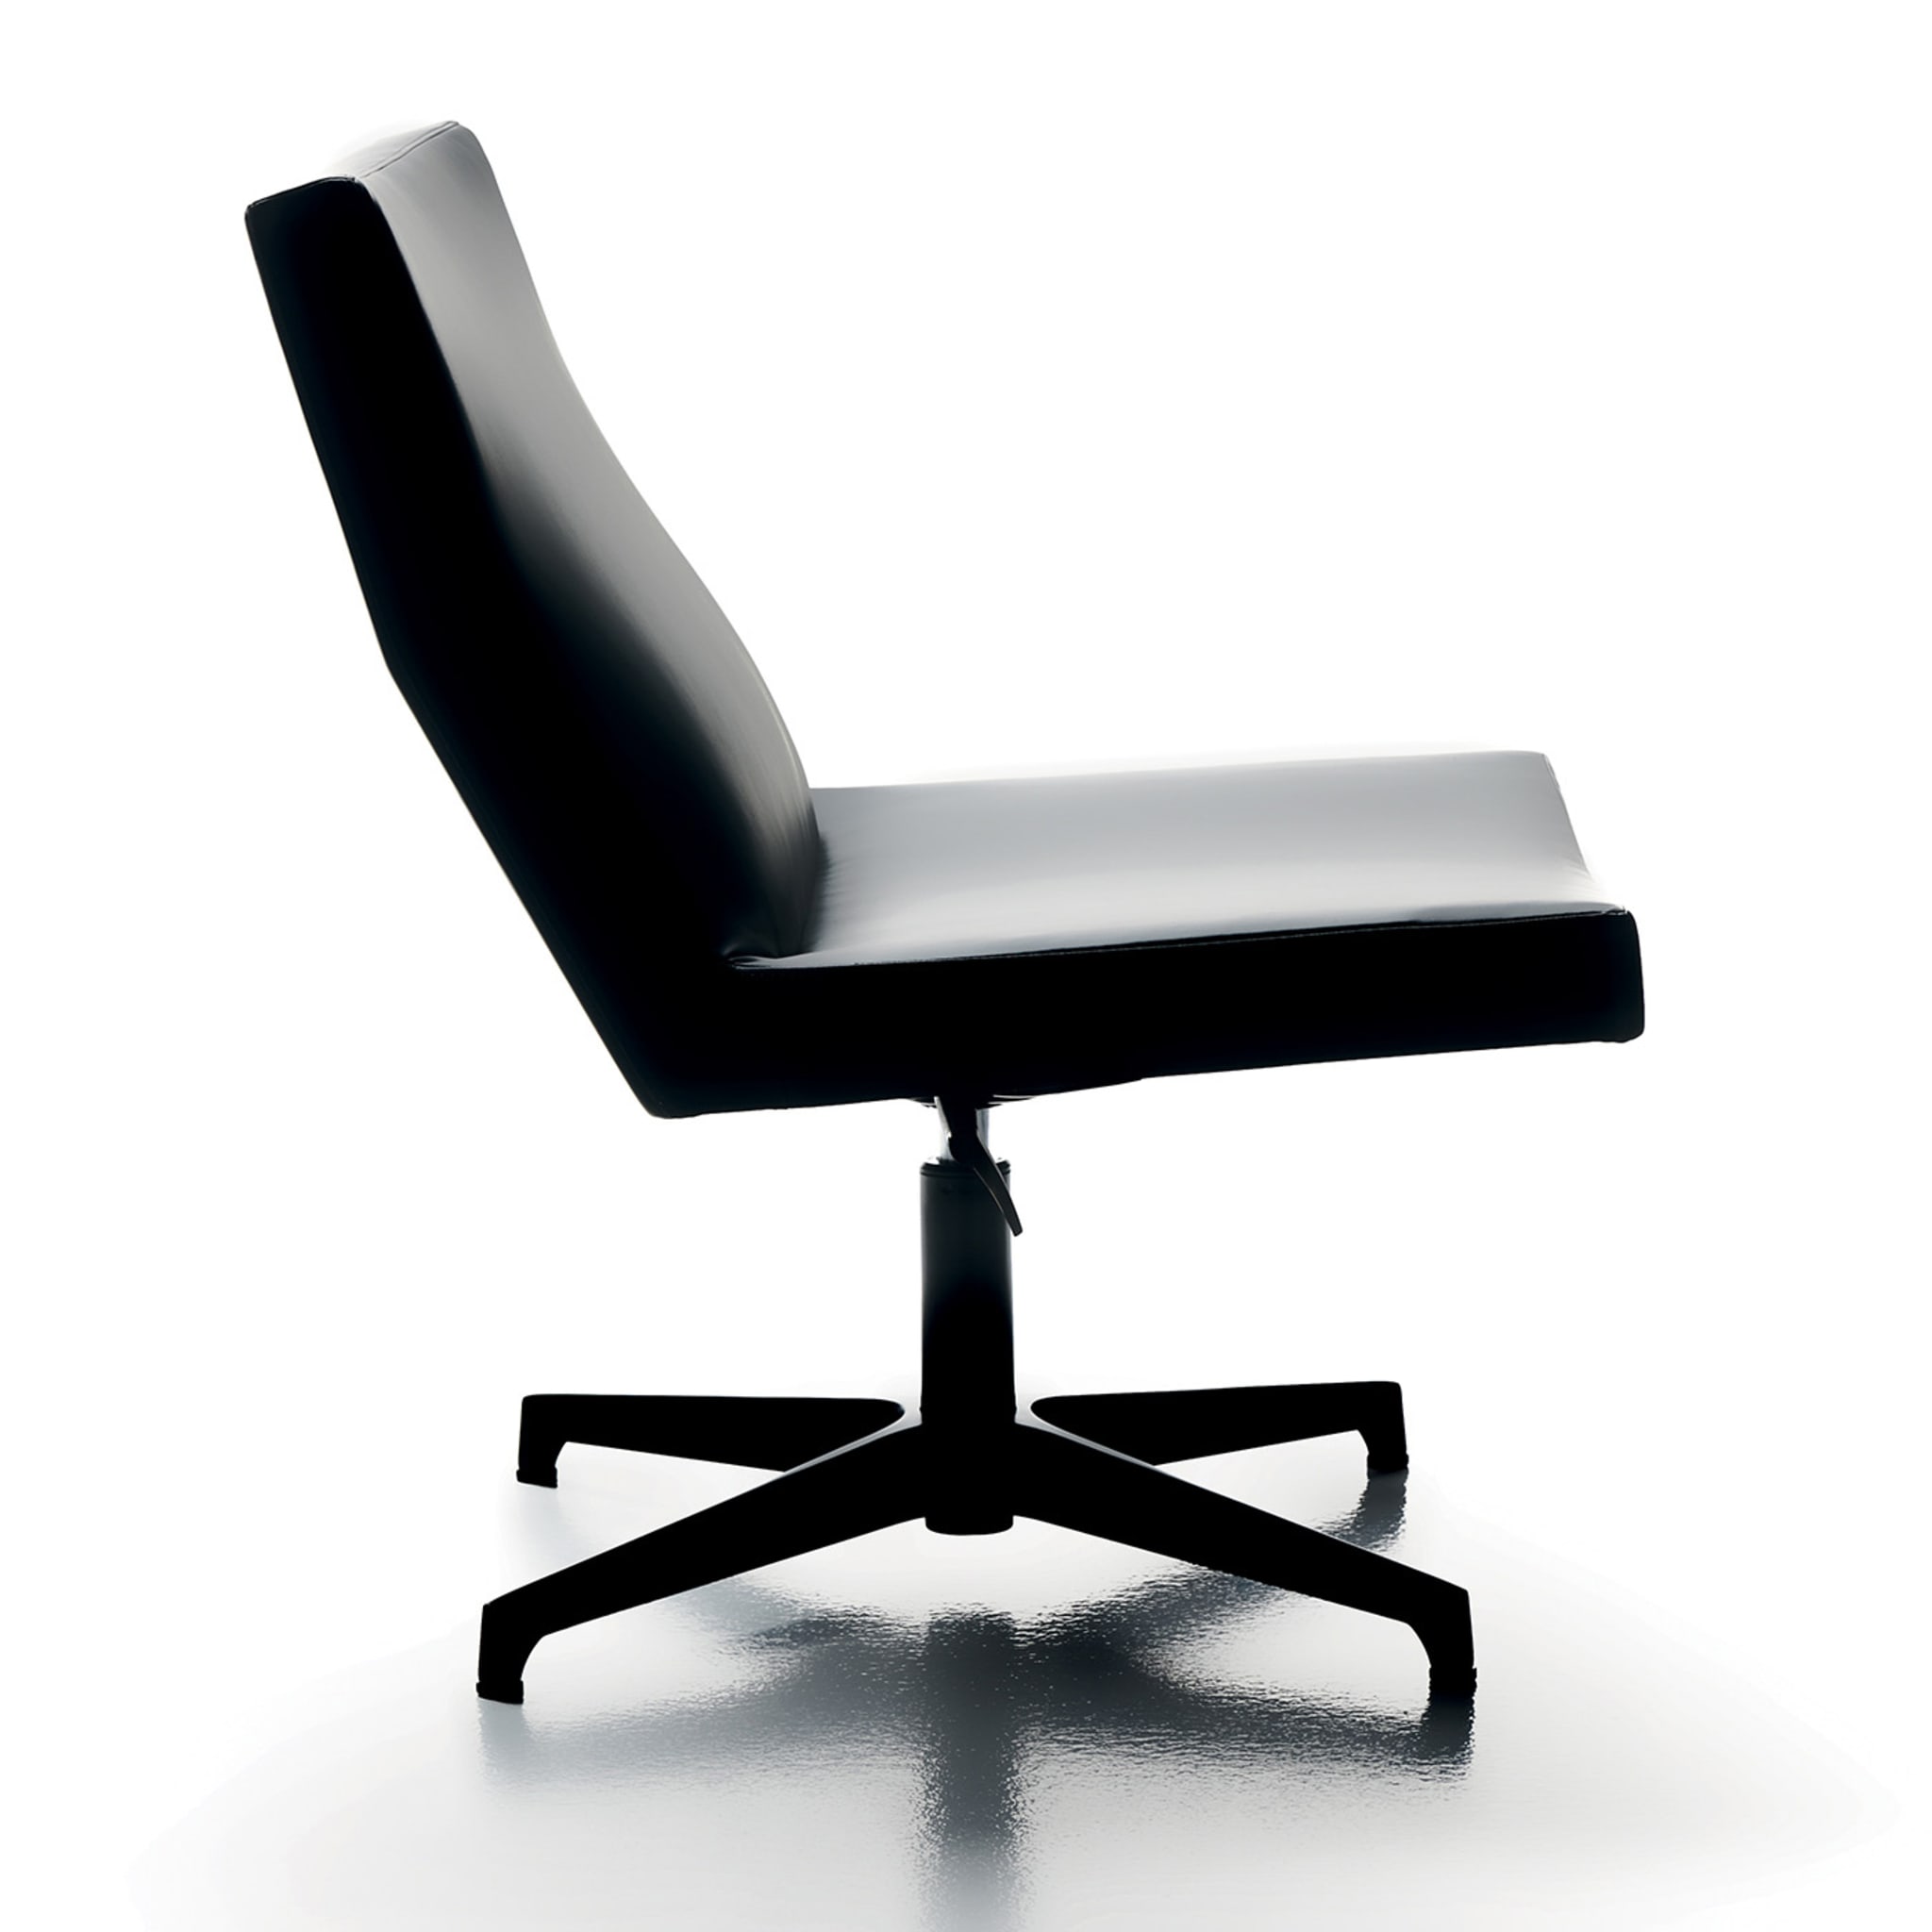 Cross Black Lounge Chair by Massimo Colombo - Alternative view 1